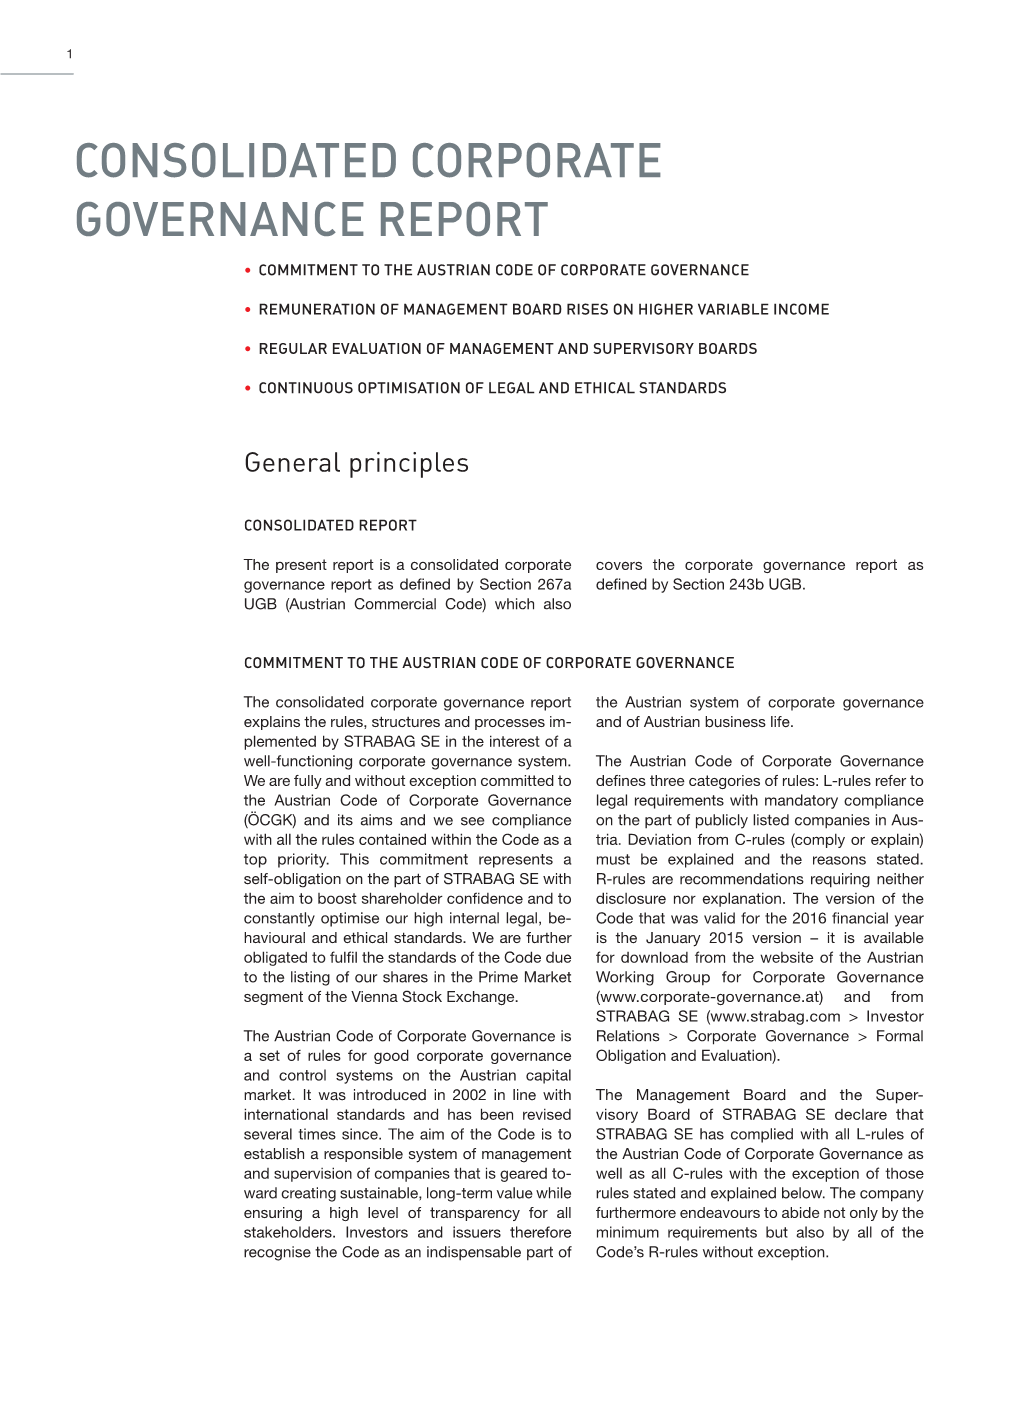 Consolidated Corporate Governance Report 2016